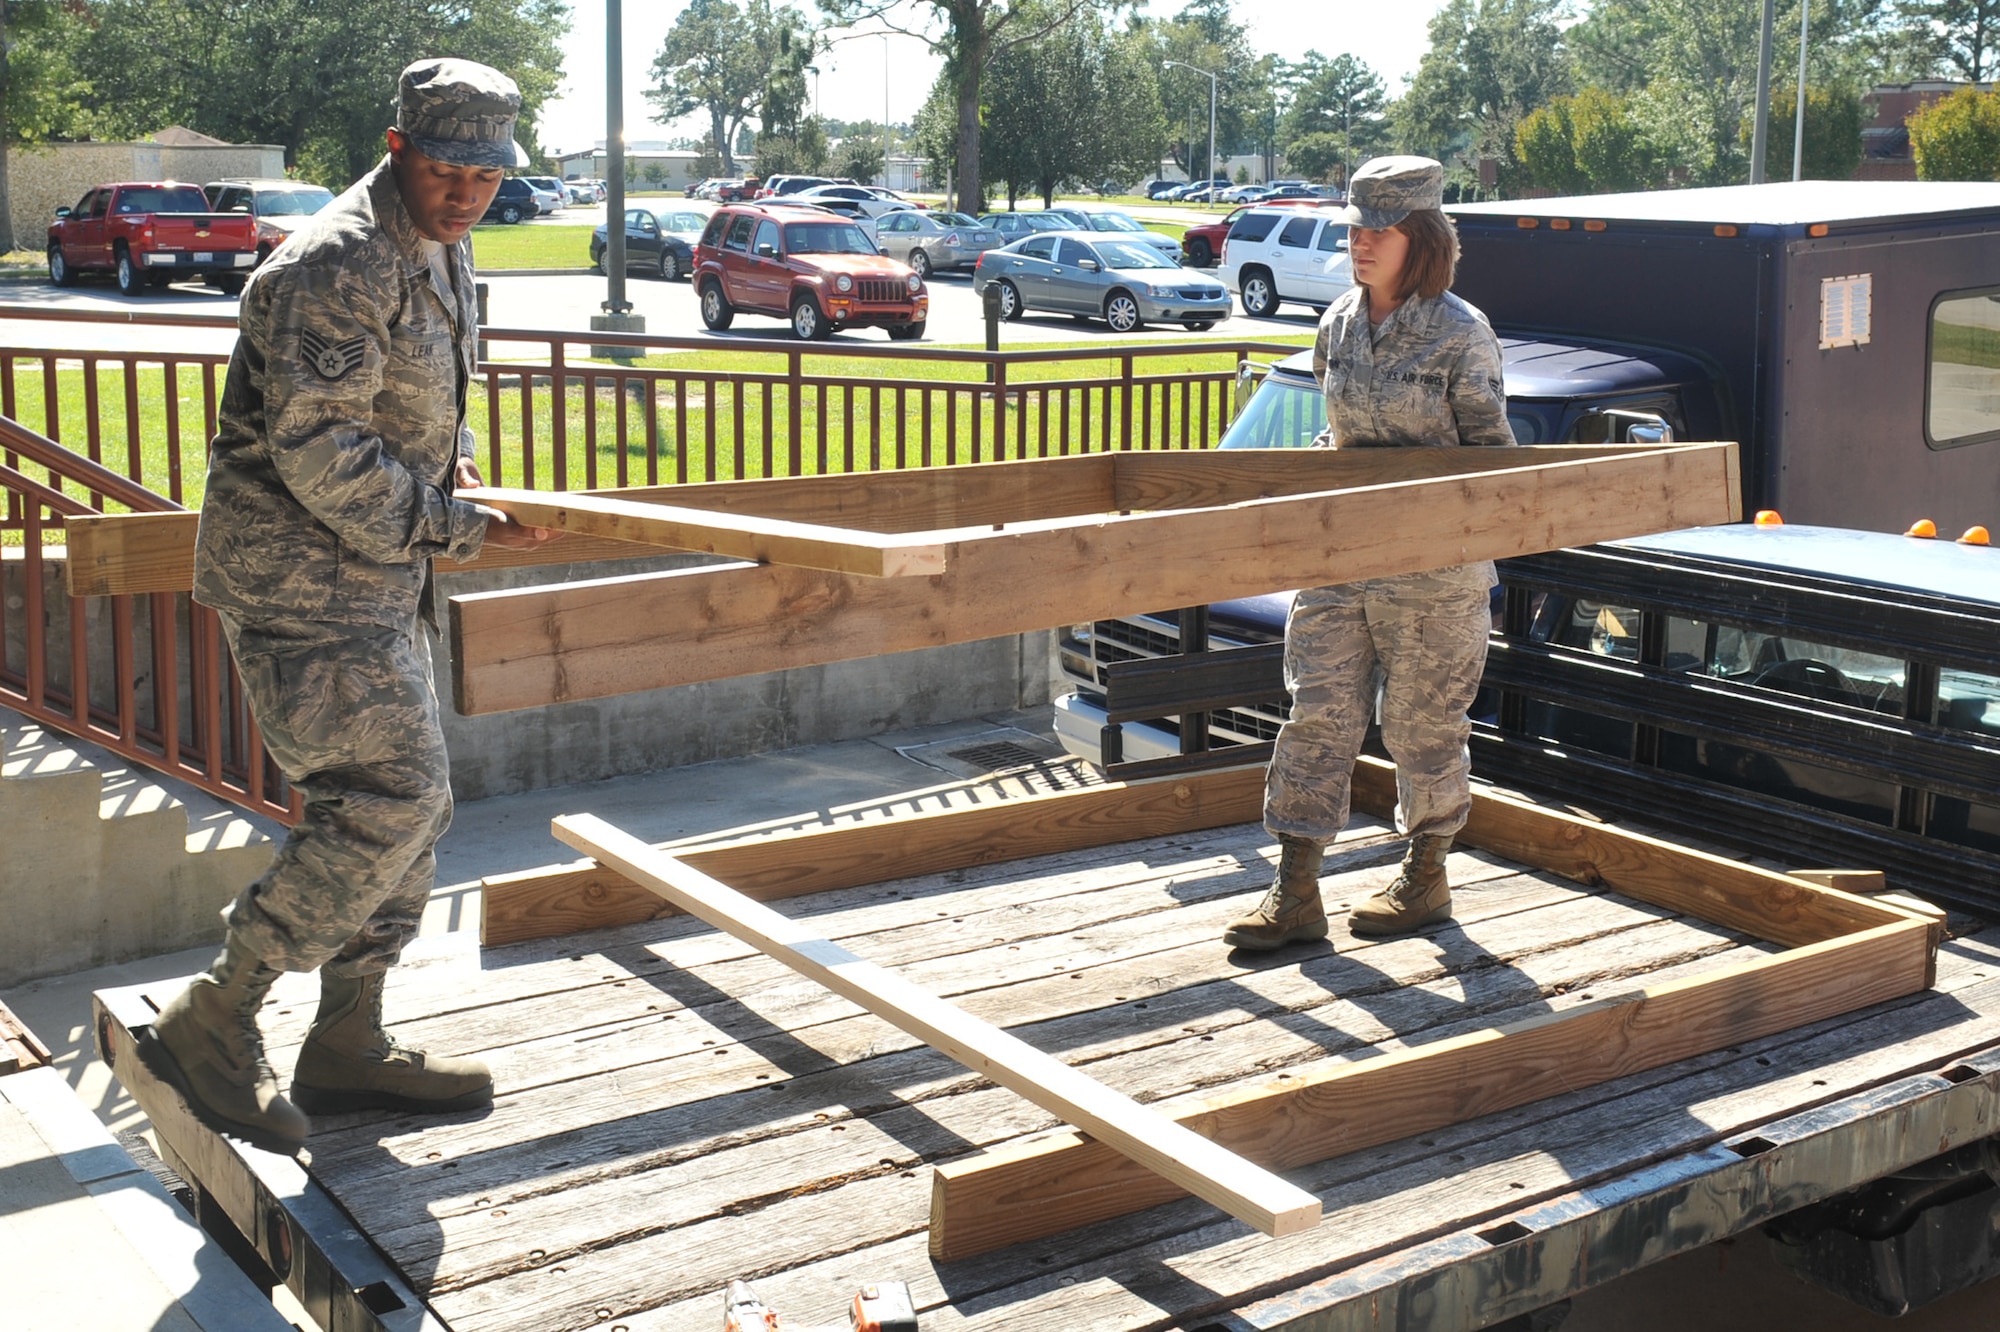 Staff Sgt. Marius Leak and Senior Airman Keny Brown remove a frame for a structural project on Seymour Johnson Air Force Base, N.C., Oct. 4, 2011. Structural journeymen take all the equipment needed to complete a project to the job site. Leak is a 4th Civil Engineer Squadron structural craftsman and hails from High Pont, N.C.  Brown is a 4 CES structural journeyman and a native of Savannah, Ga. (U.S. Air Force photo by Senior Airman Whitney Stanfield)